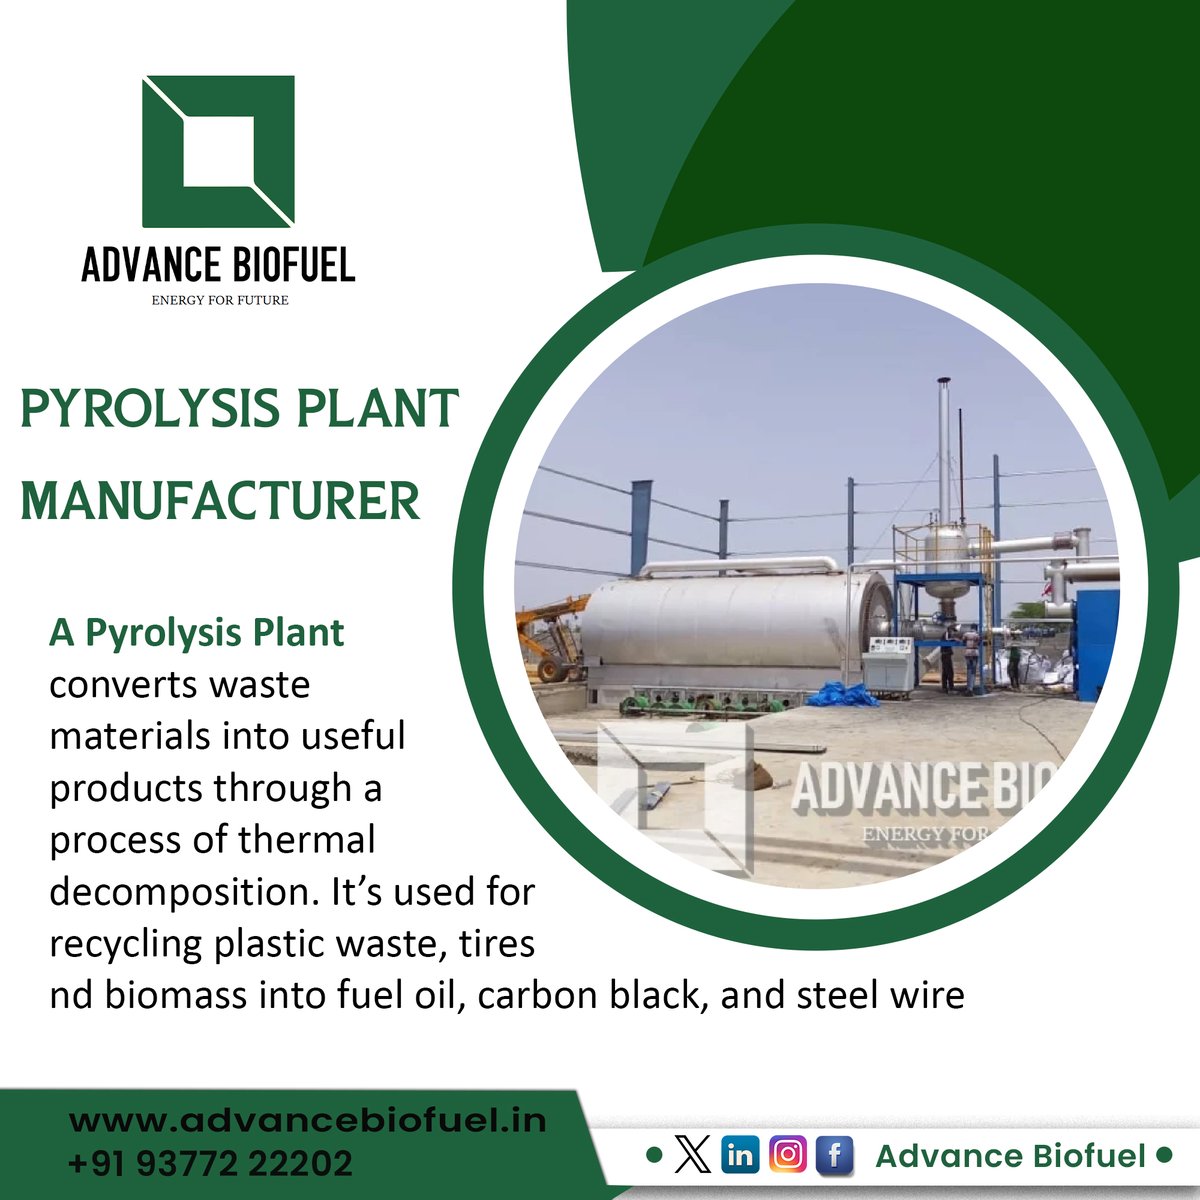 A Pyrolysis Plant converts waste materials into useful products through a process of thermal decomposition. It's used for recycling plastic waste.

#AdvancedBiofuel #PyrolysisPlant #WasteConversion #RecyclingTechnology #EnvironmentalSustainability #GreenEnergy #CircularEconomy